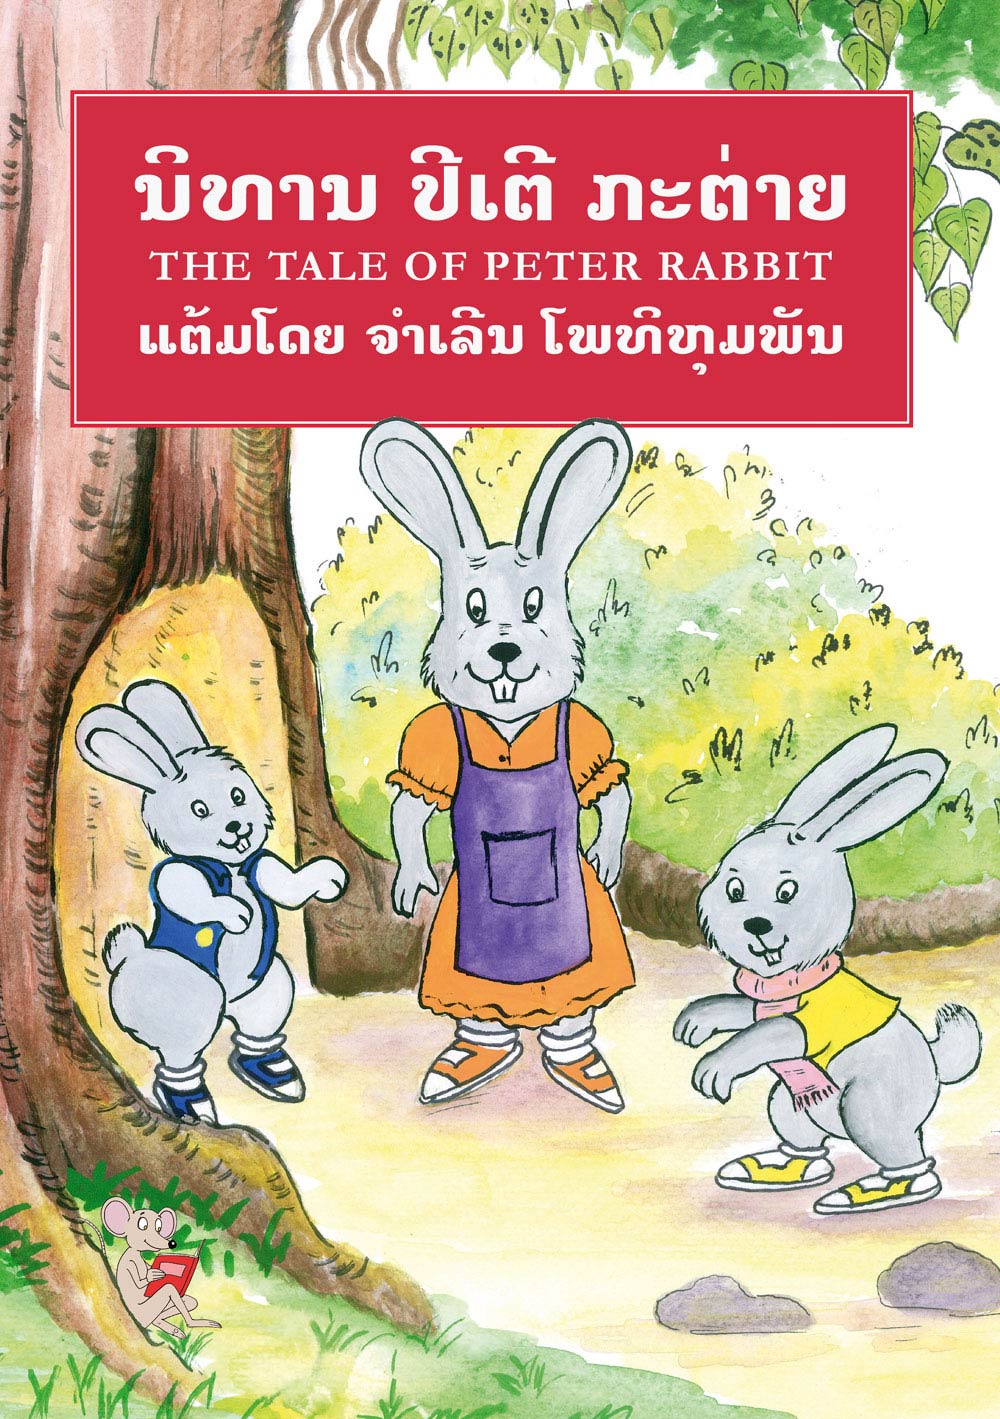 The Tale of Peter Rabbit large book cover, published in Lao and English